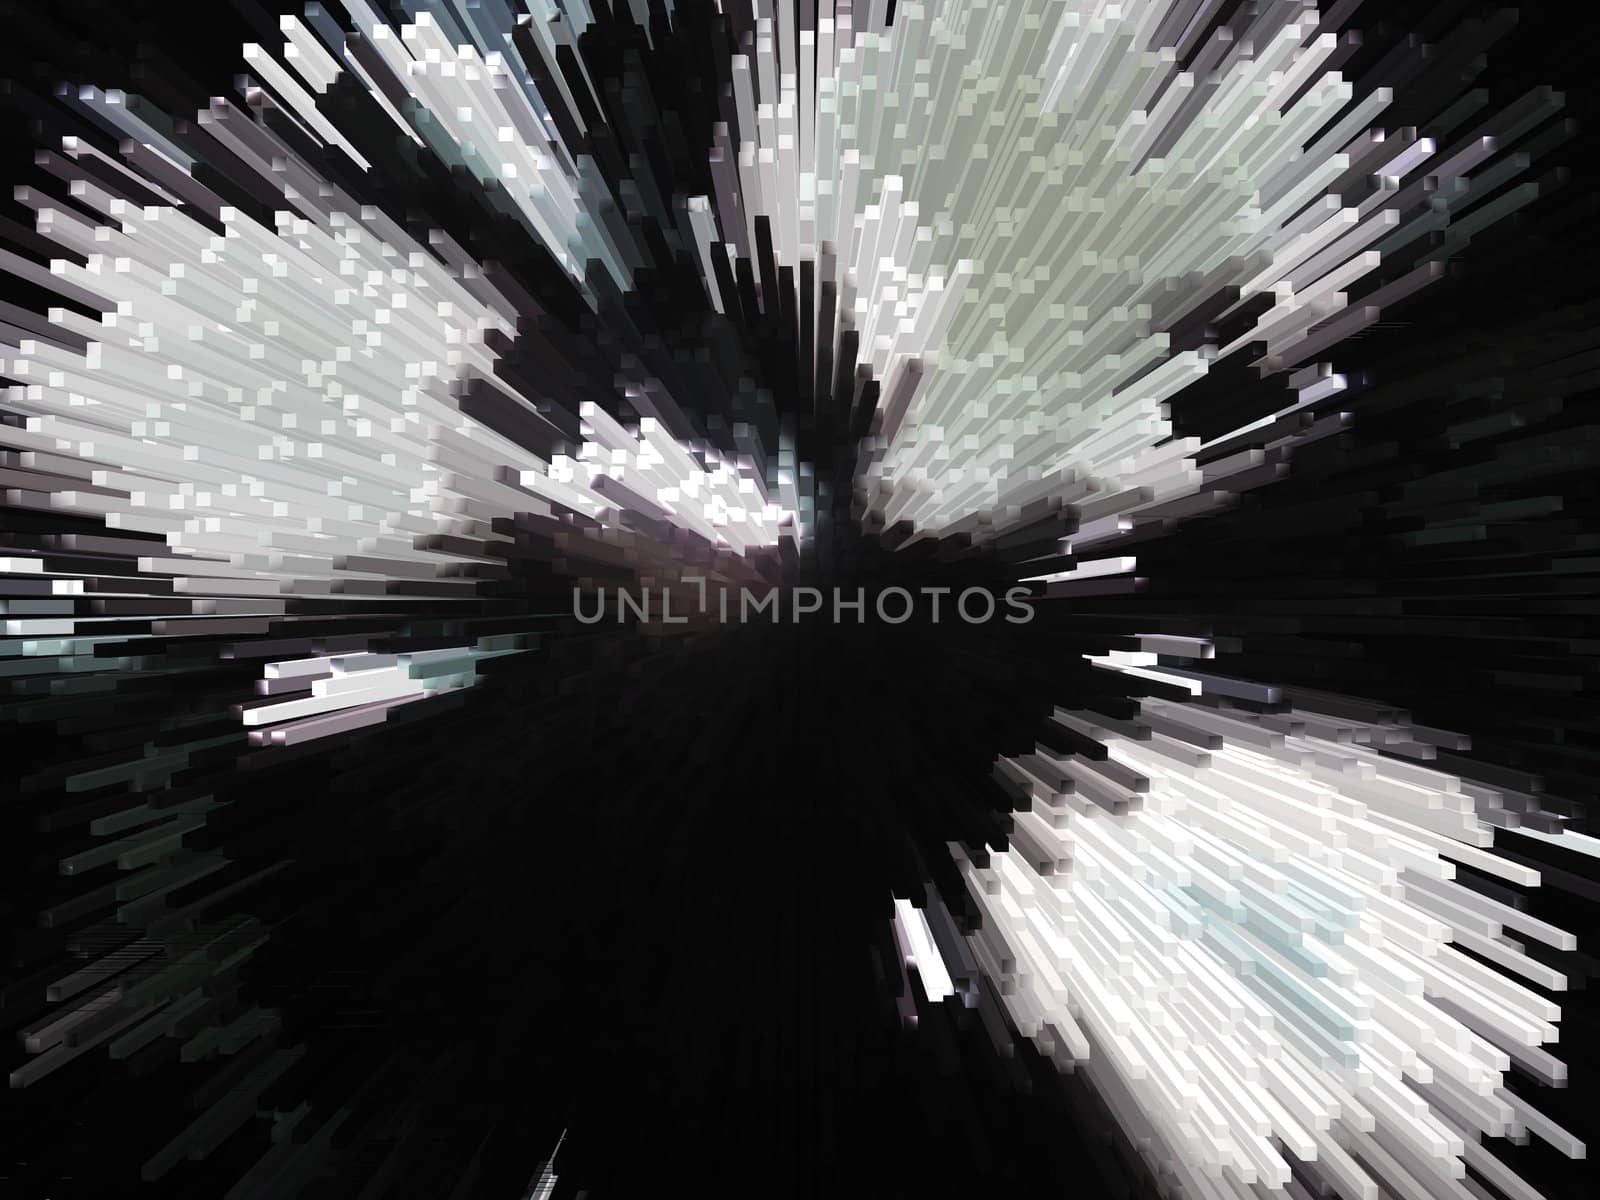 Image with background like a green and black explosion